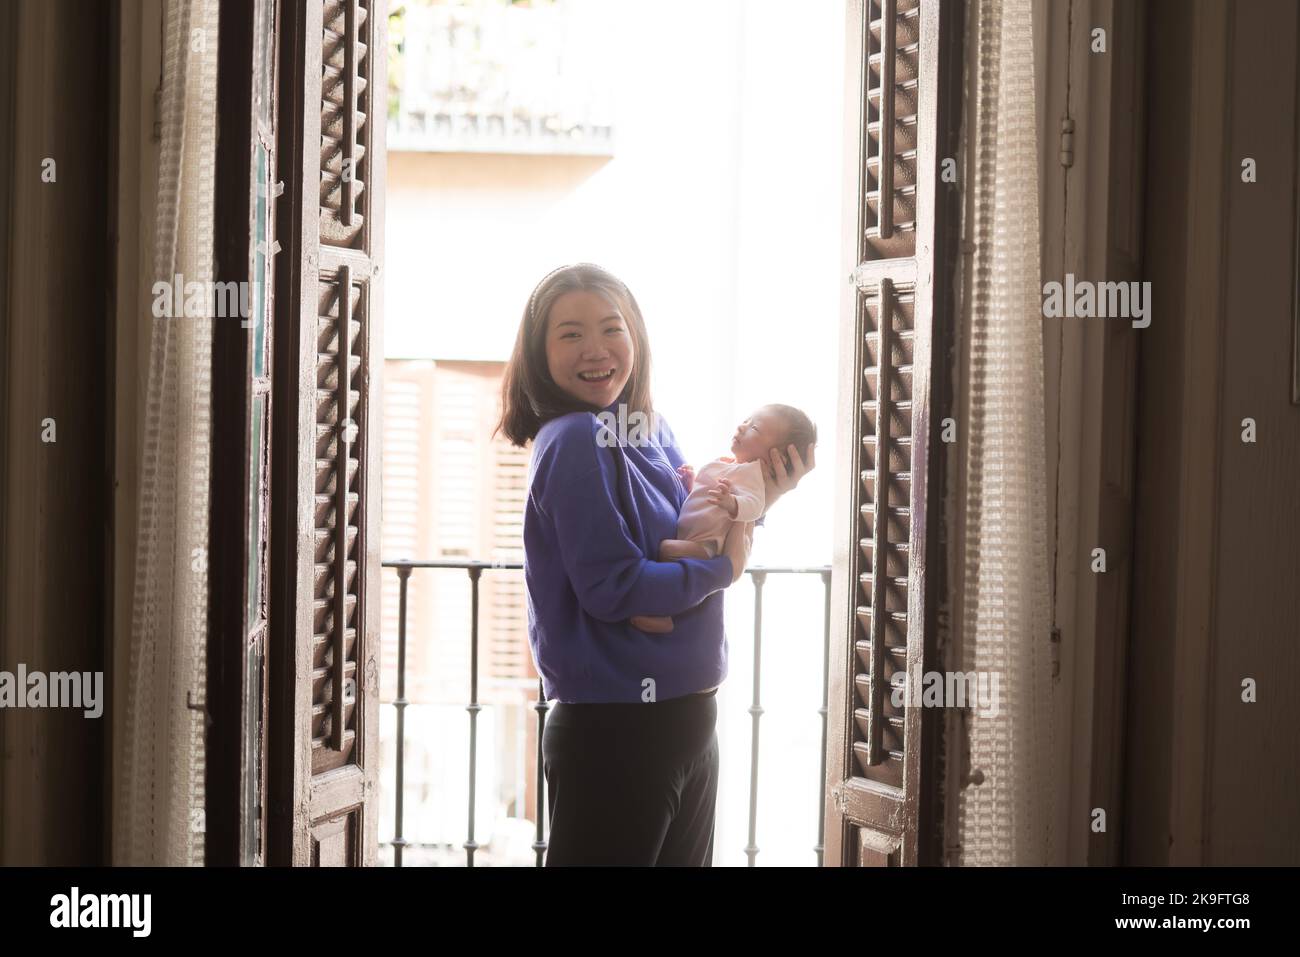 lifestyle shot on young and happy Asian Chinese woman holding tenderly her adorable newborn baby girl in her arms in mother and daughter love and care Stock Photo